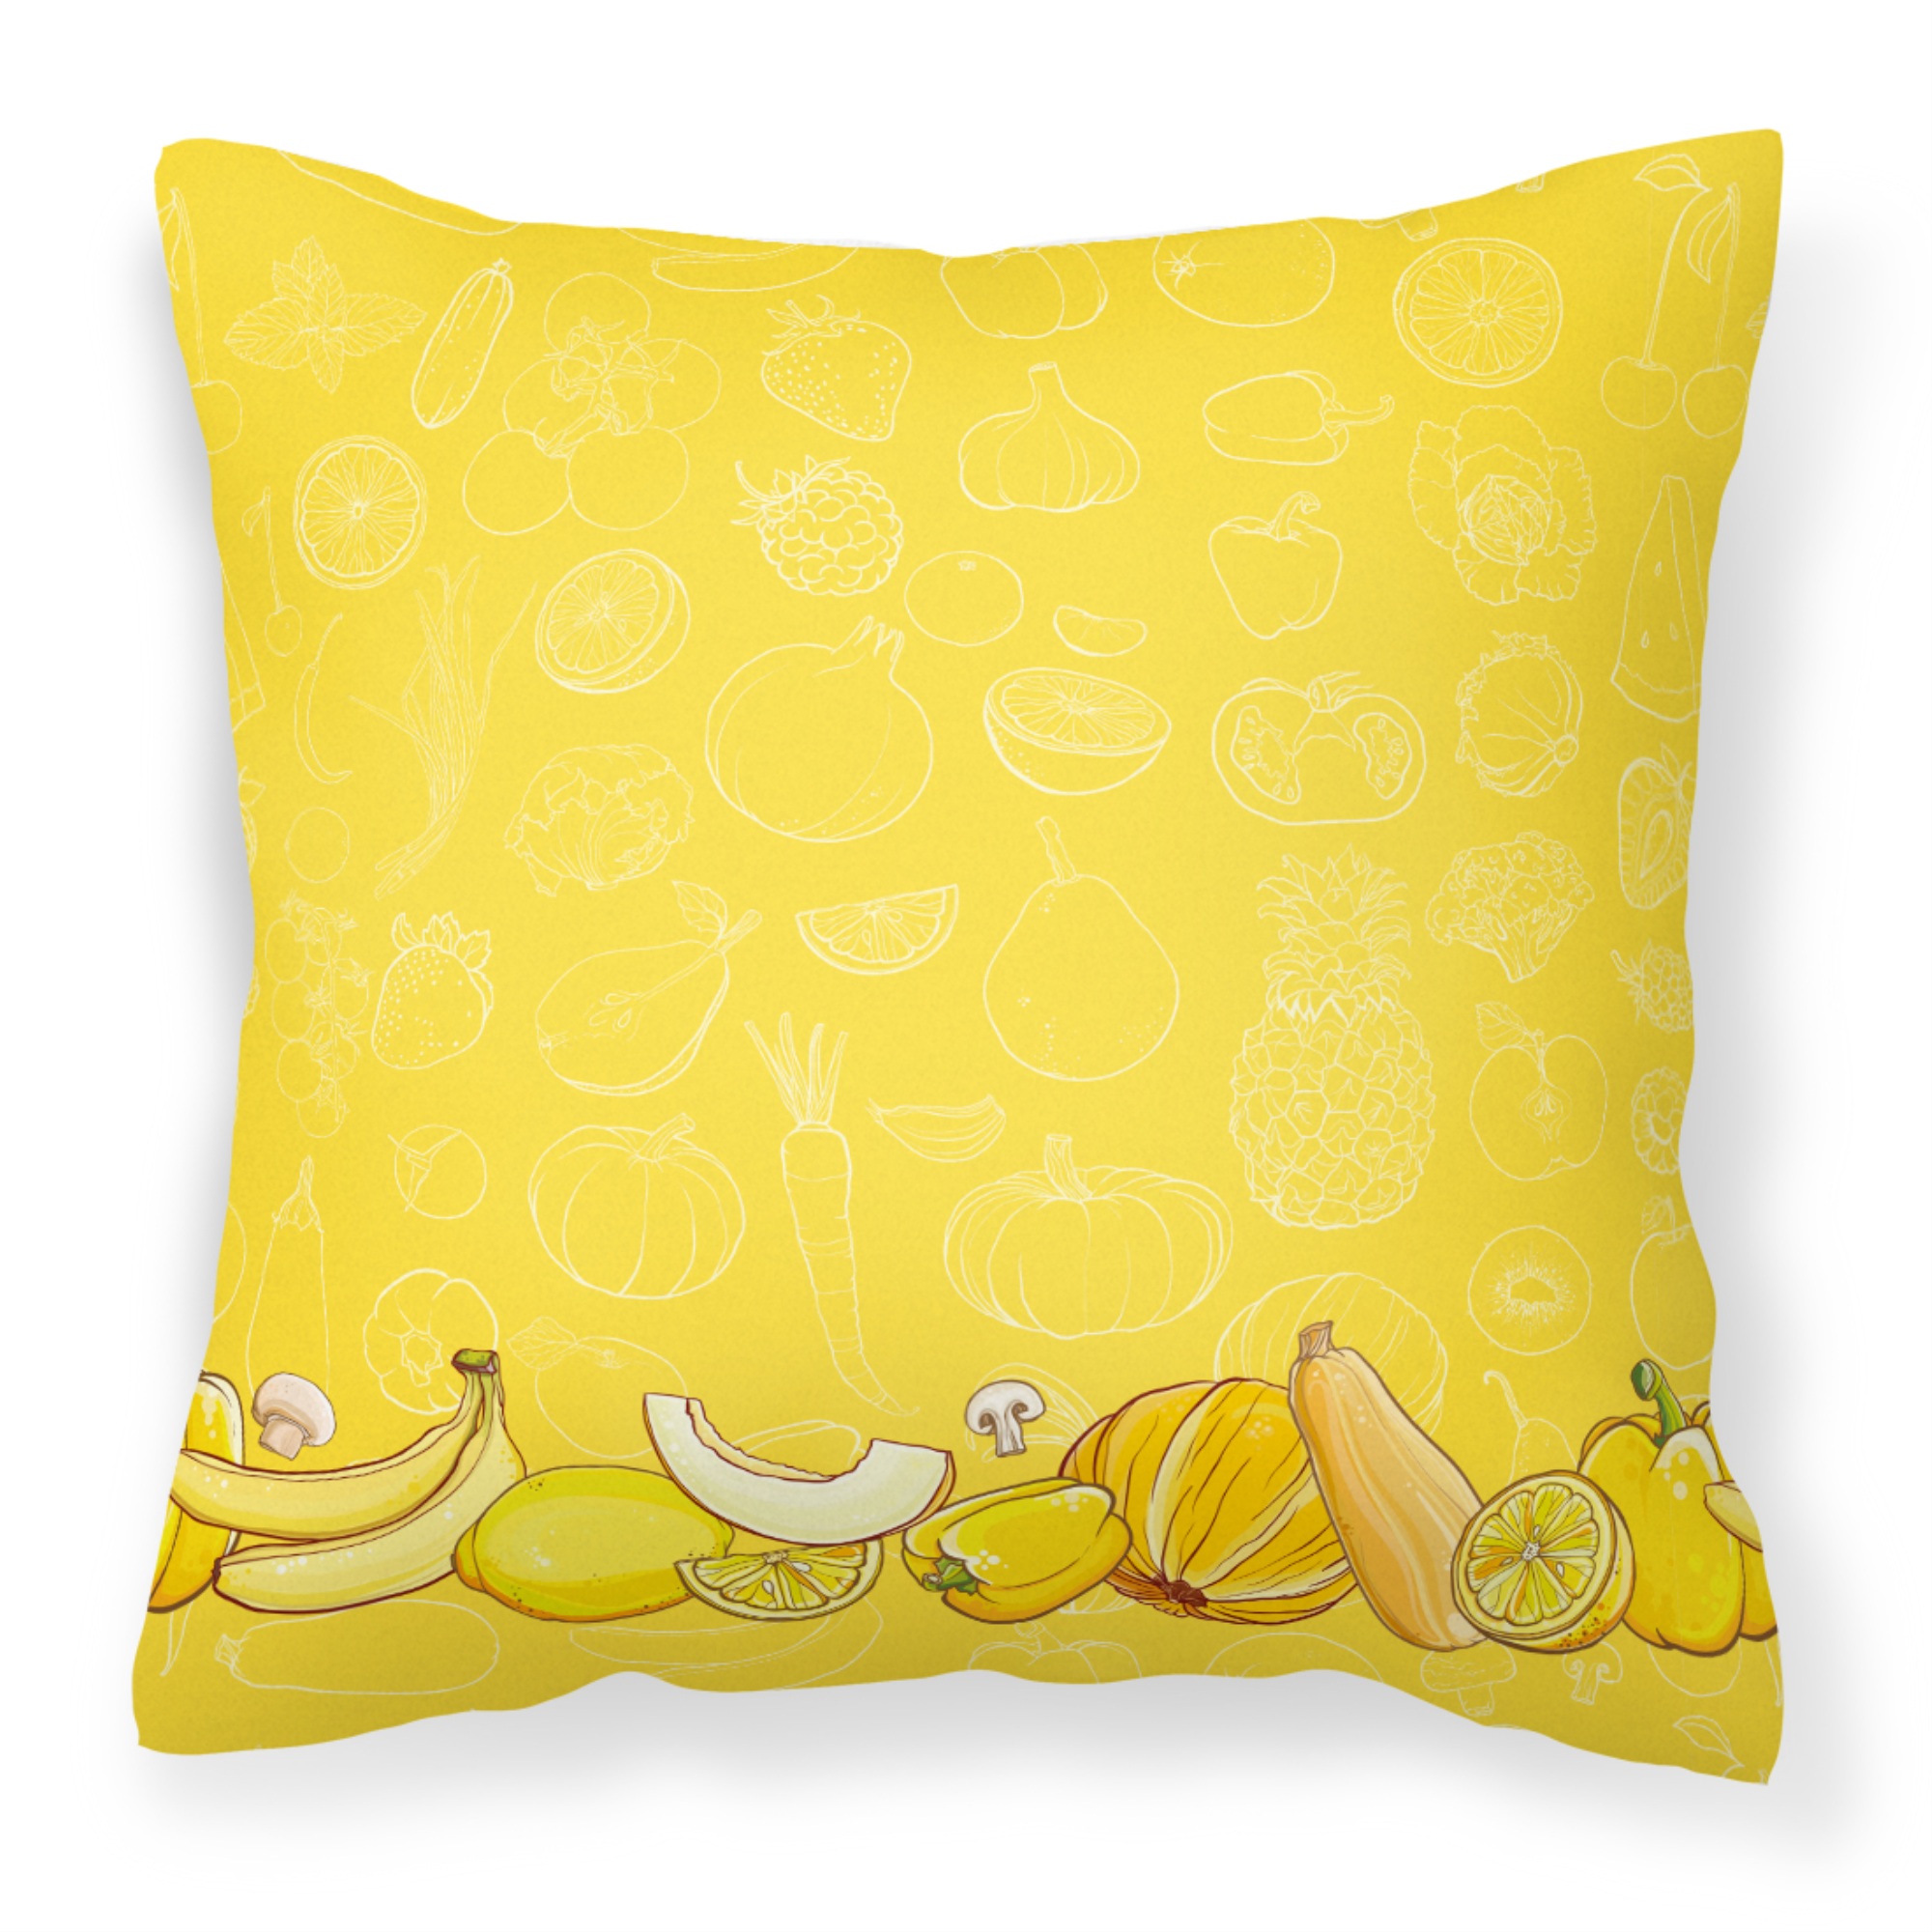 Caroline's Treasures "Caroline's Treasures BB5134PW1414 Fruits and Vegetables in Yellow Fabric Decorative Pillow, Multicolor, 14Hx14W"